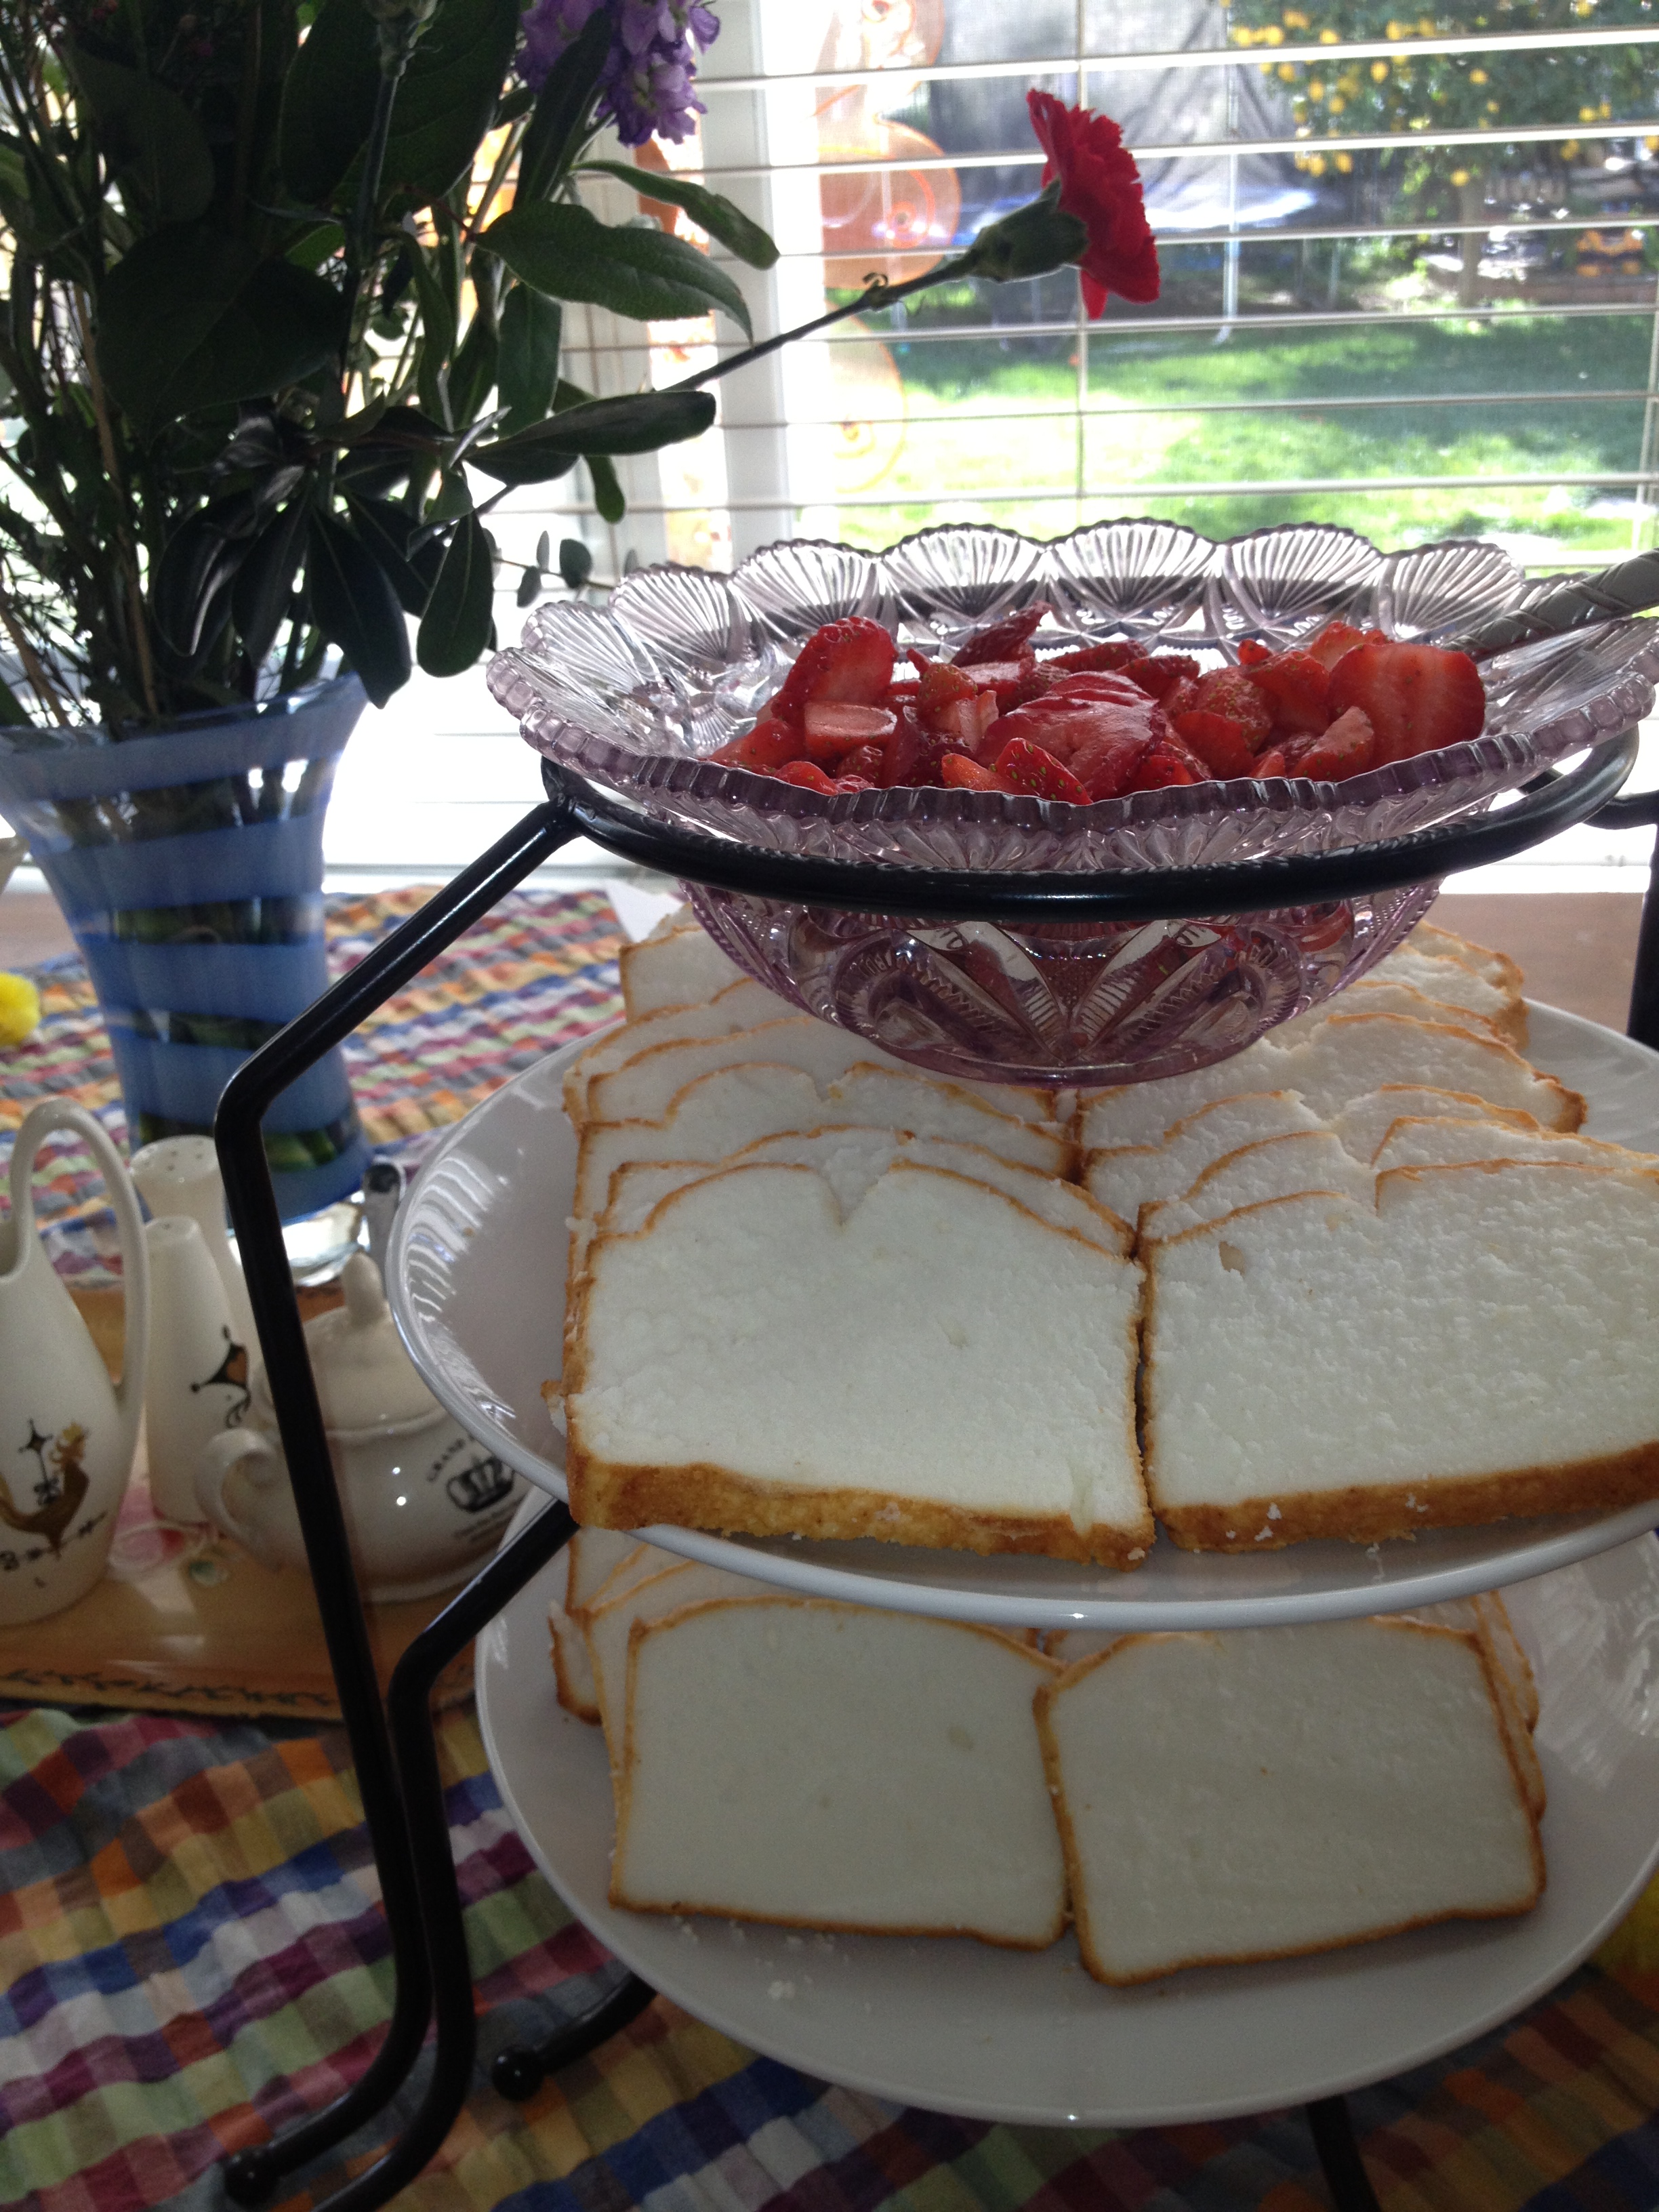 Strawberries and pound cake -- served in Grandma's glass bowls...